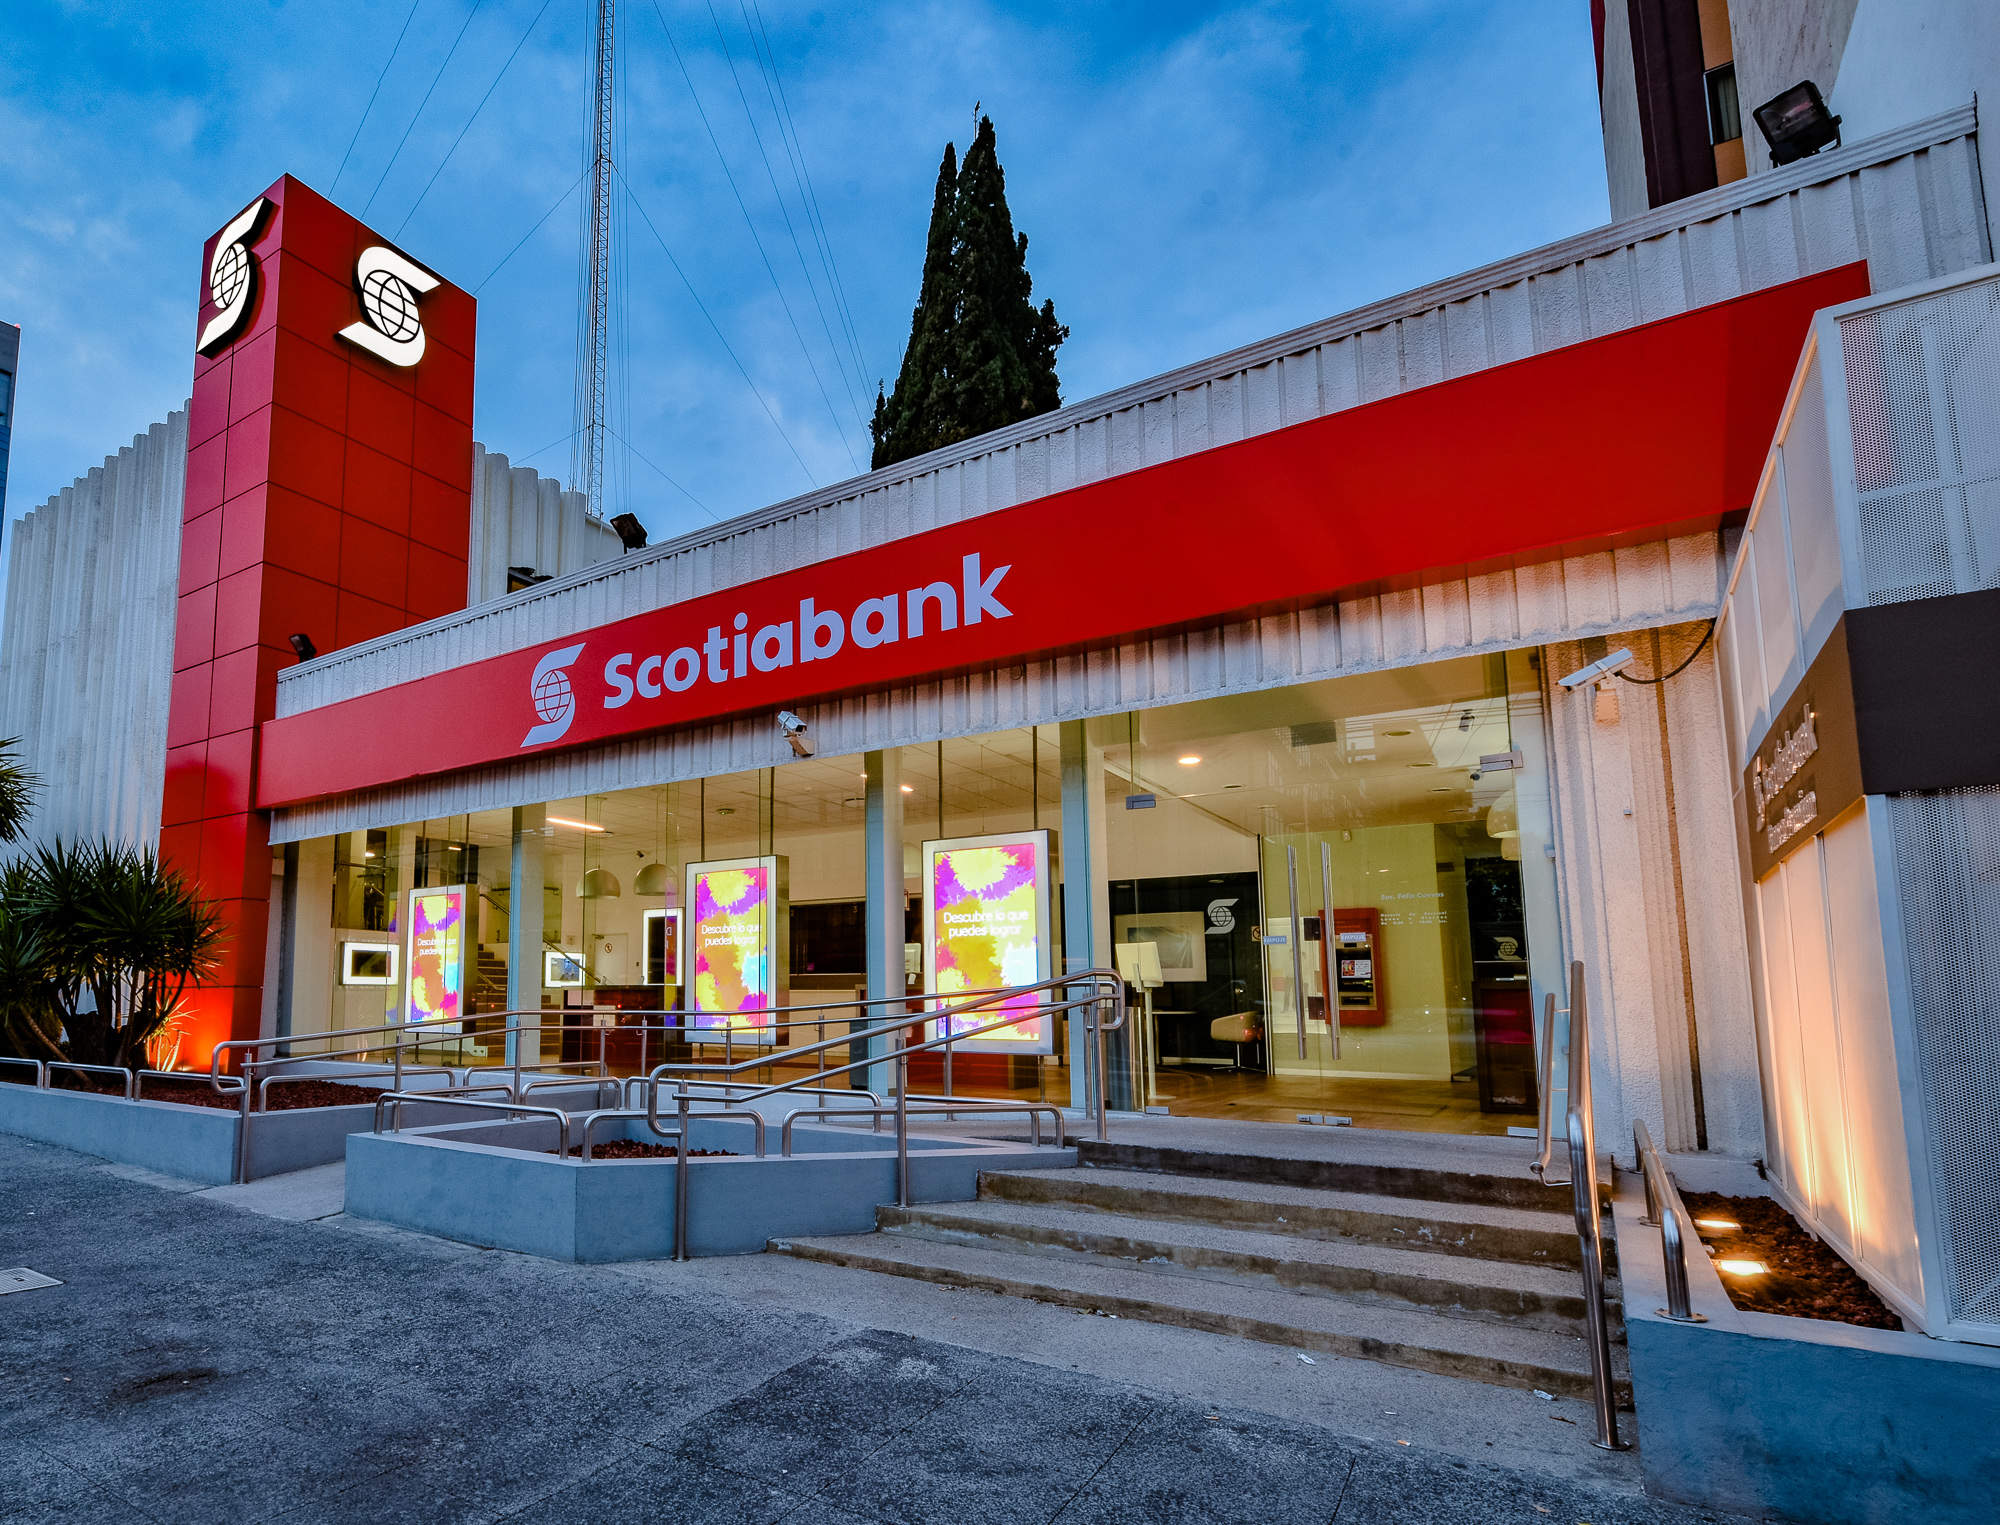 scotiabank foreign exchange outlook 2021